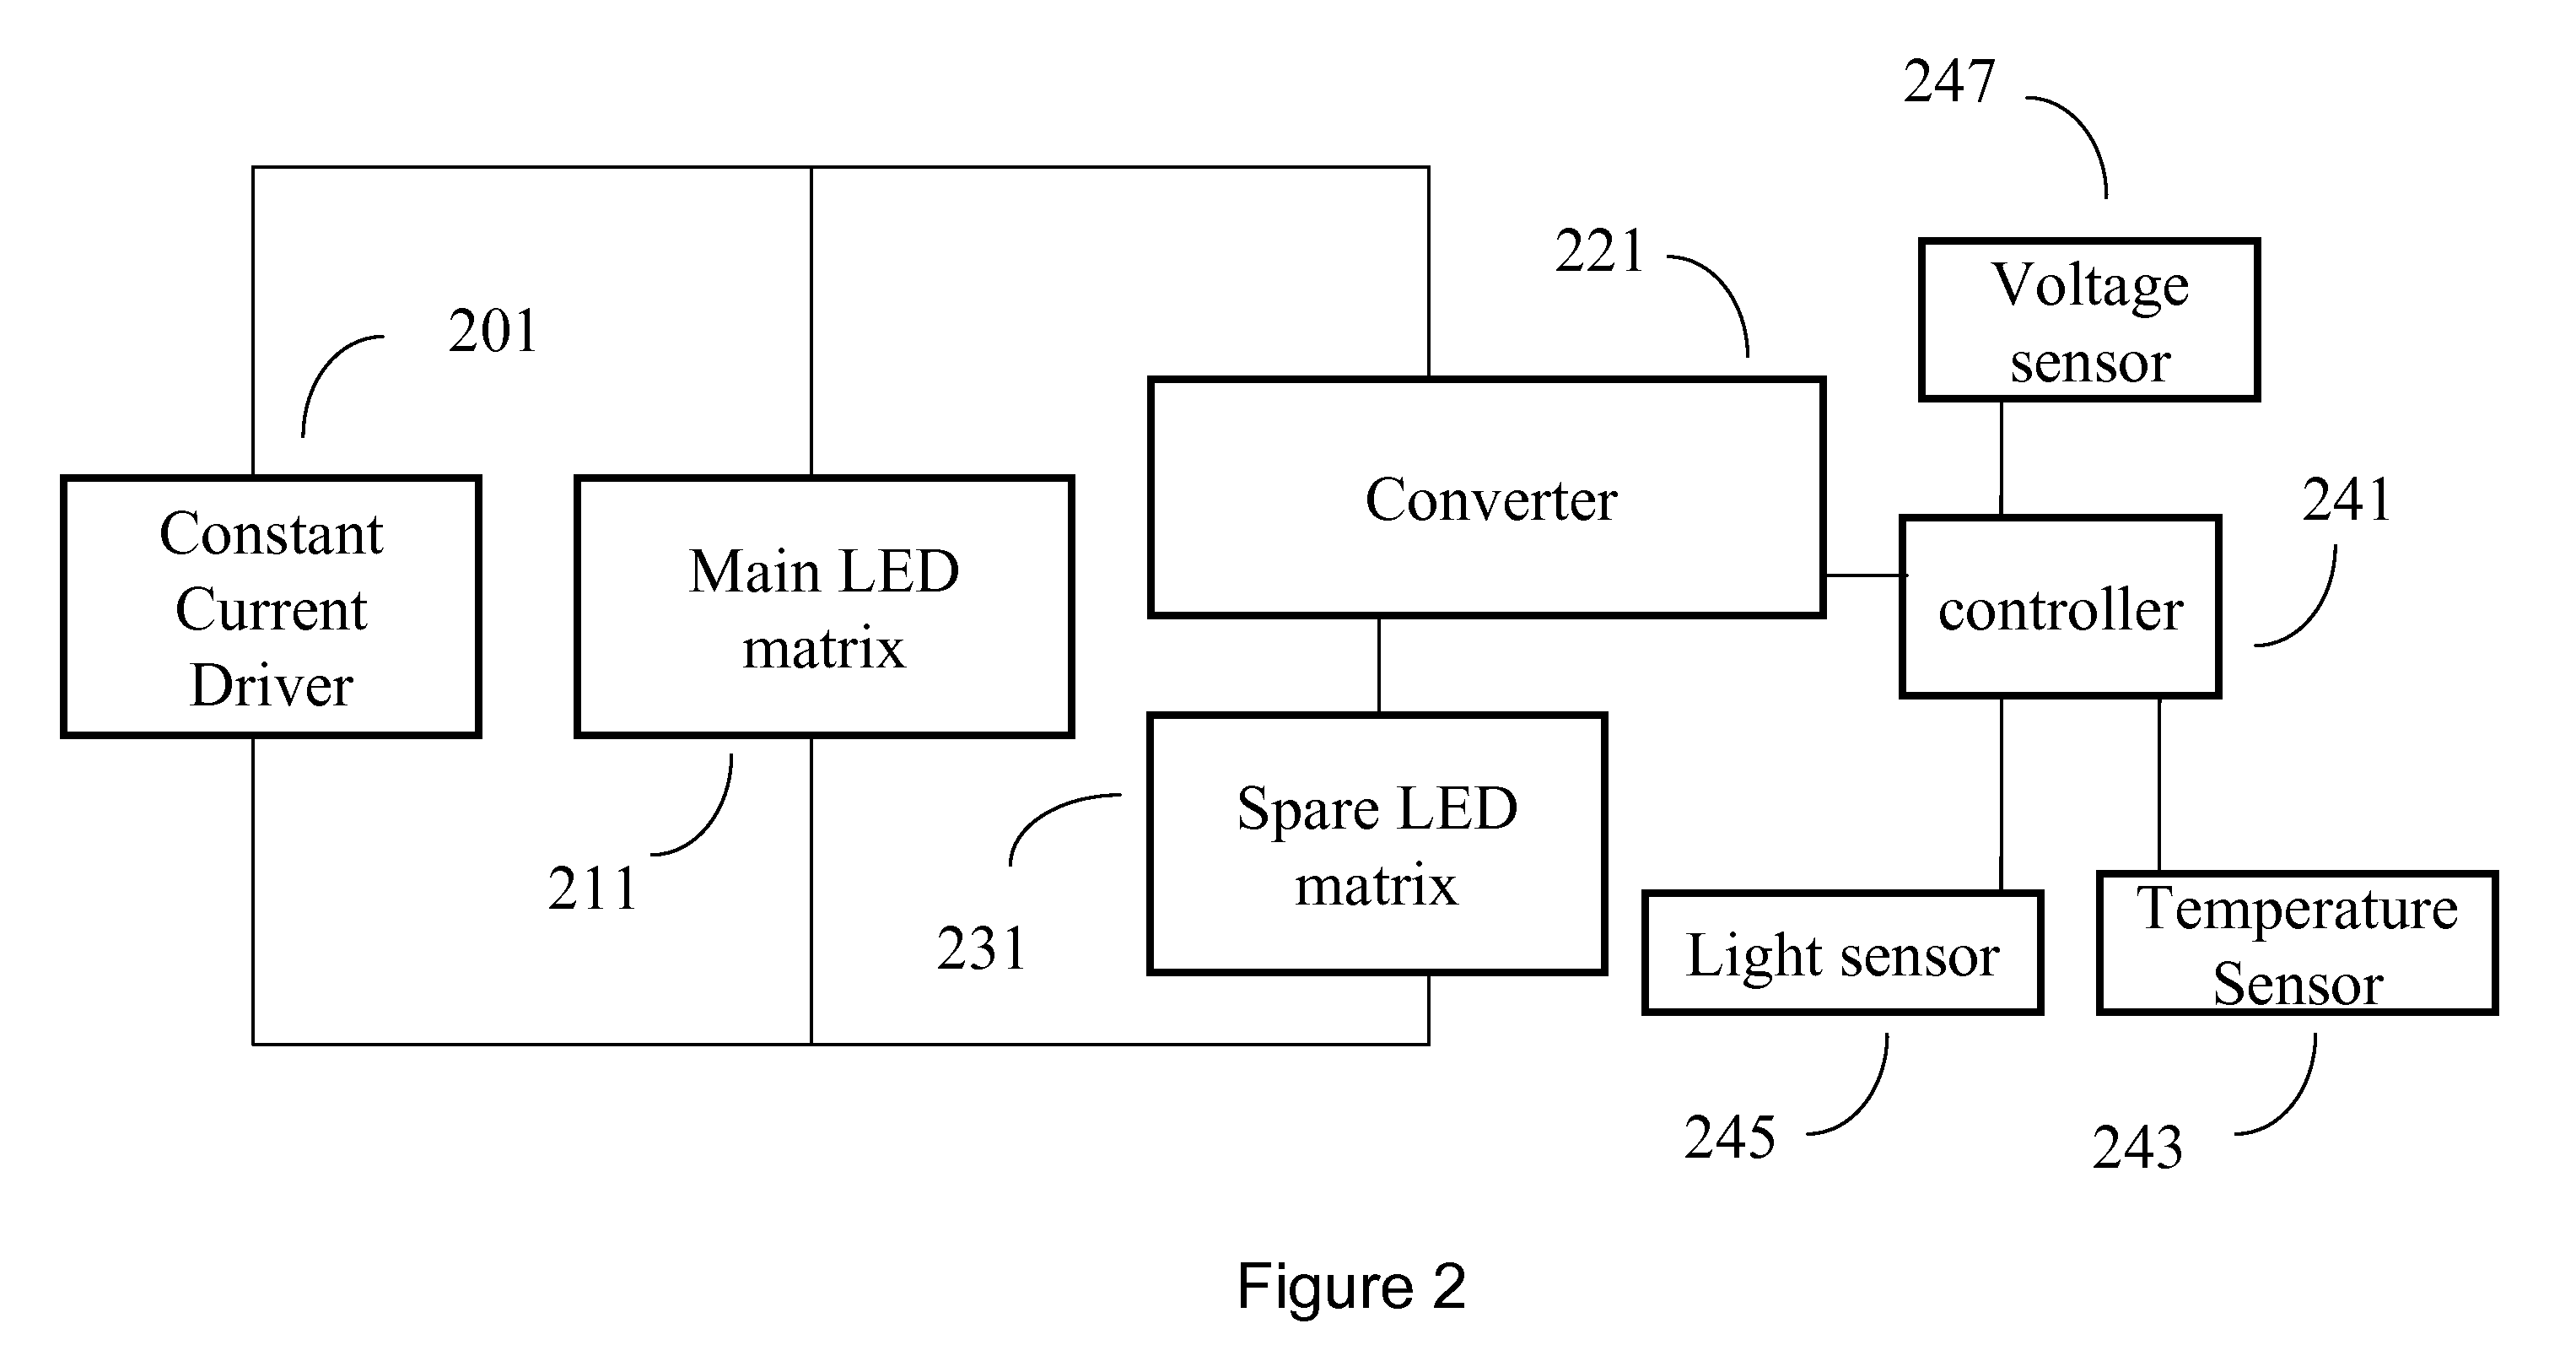 Apparatus and method to enhance the life of Light Emitting diode (LED) devices in an LED matrix